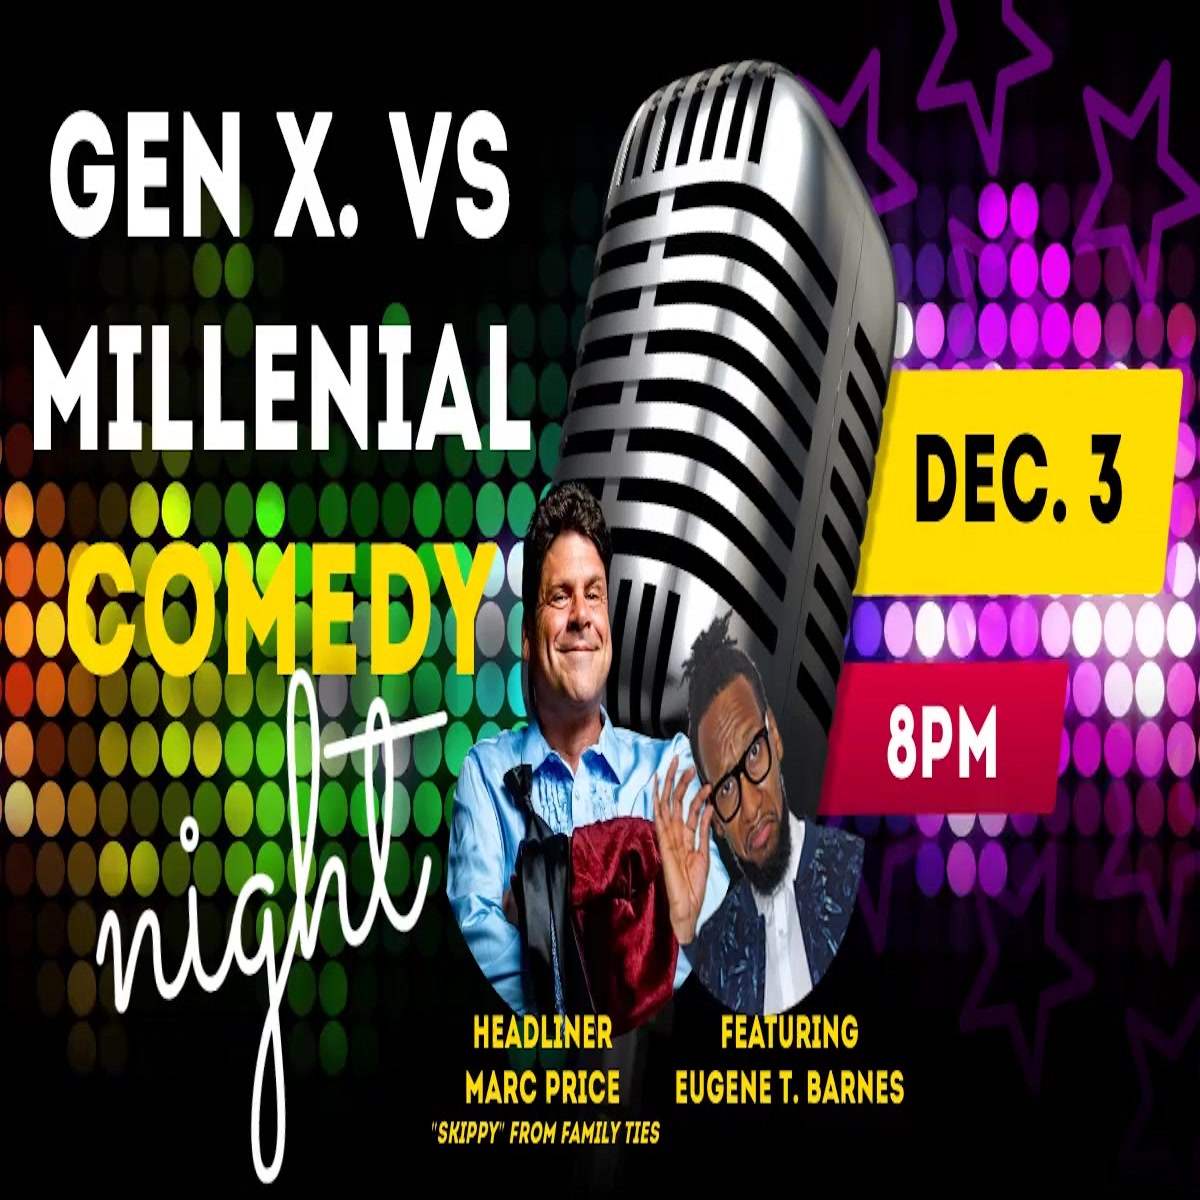 Gen. X vs Millenial Comedy Night, Middlesex, New Jersey, United States